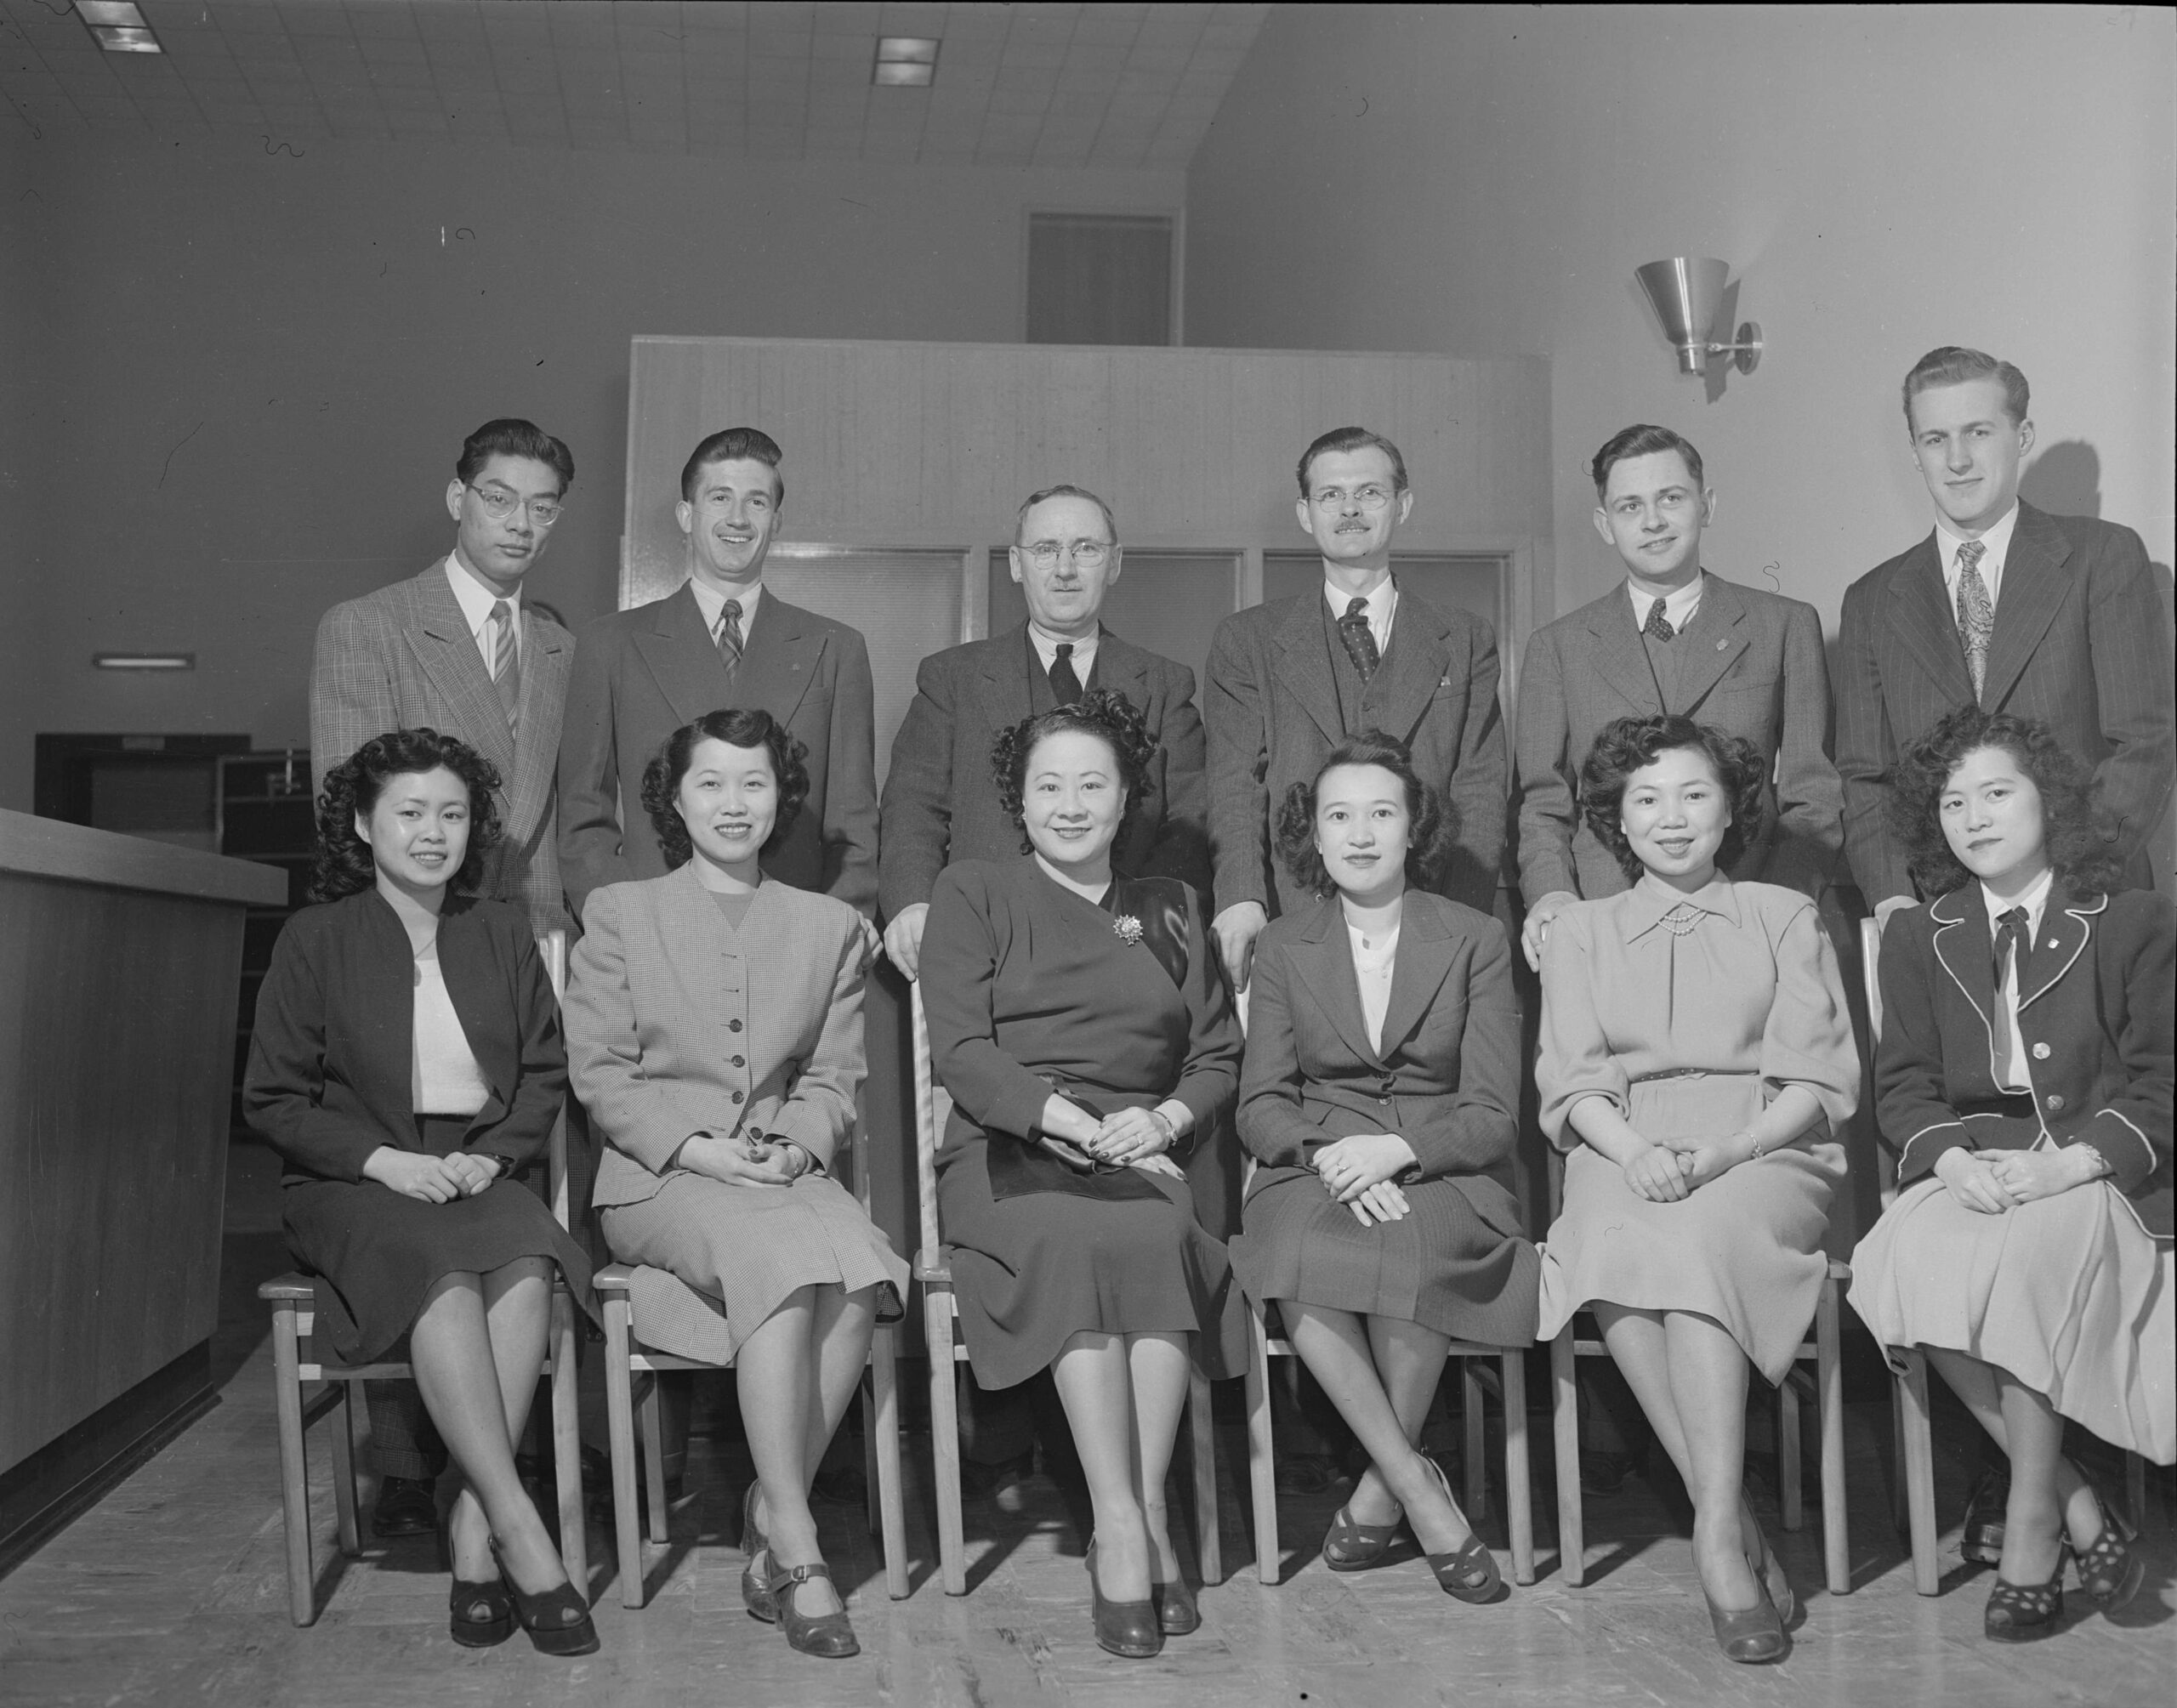 Staff of Bank of Montreal, Chinese Branch at Pender and Columbia Streets, Apr. 22, 1948. Reference code: AM1545-S3-: CVA 586-11562